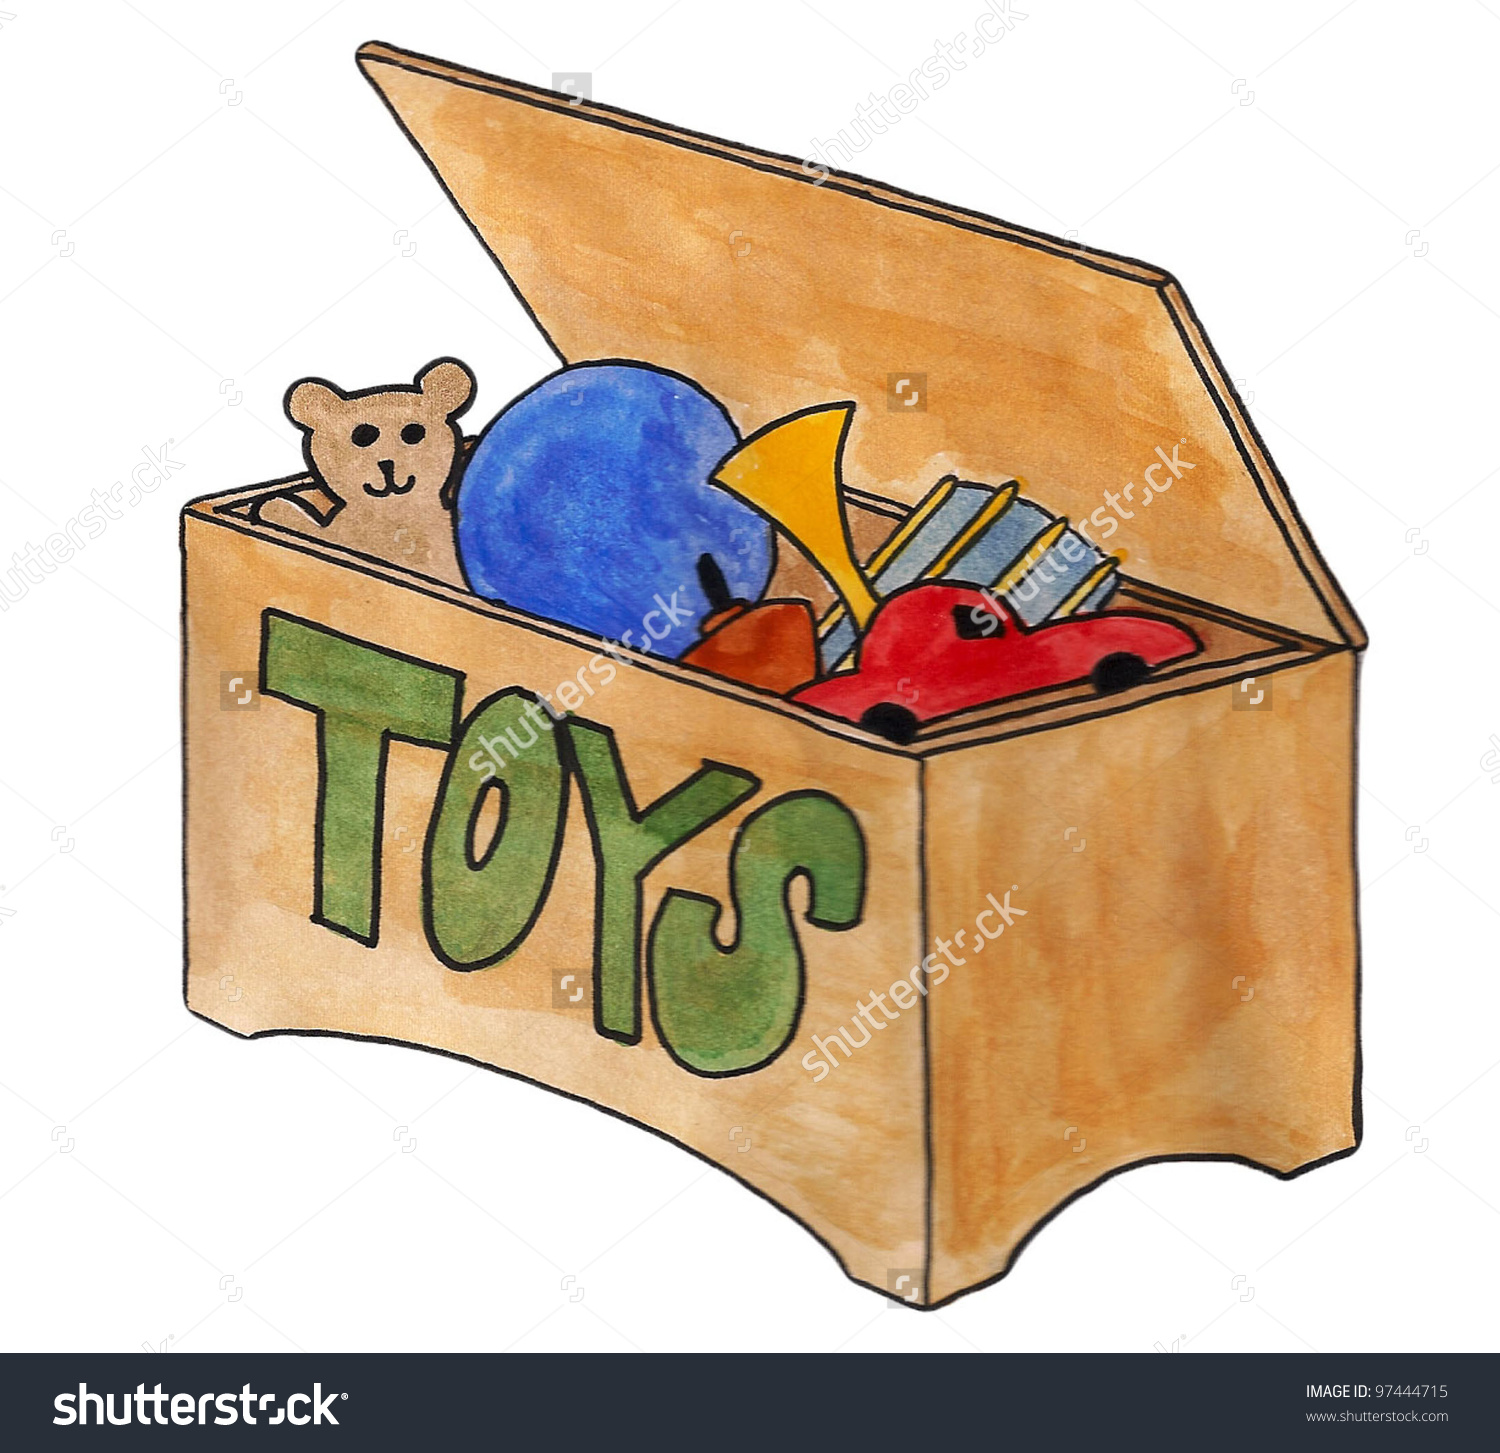 Embed this image in your blog or website. toys. clipartlook. clipart. toys clipart...